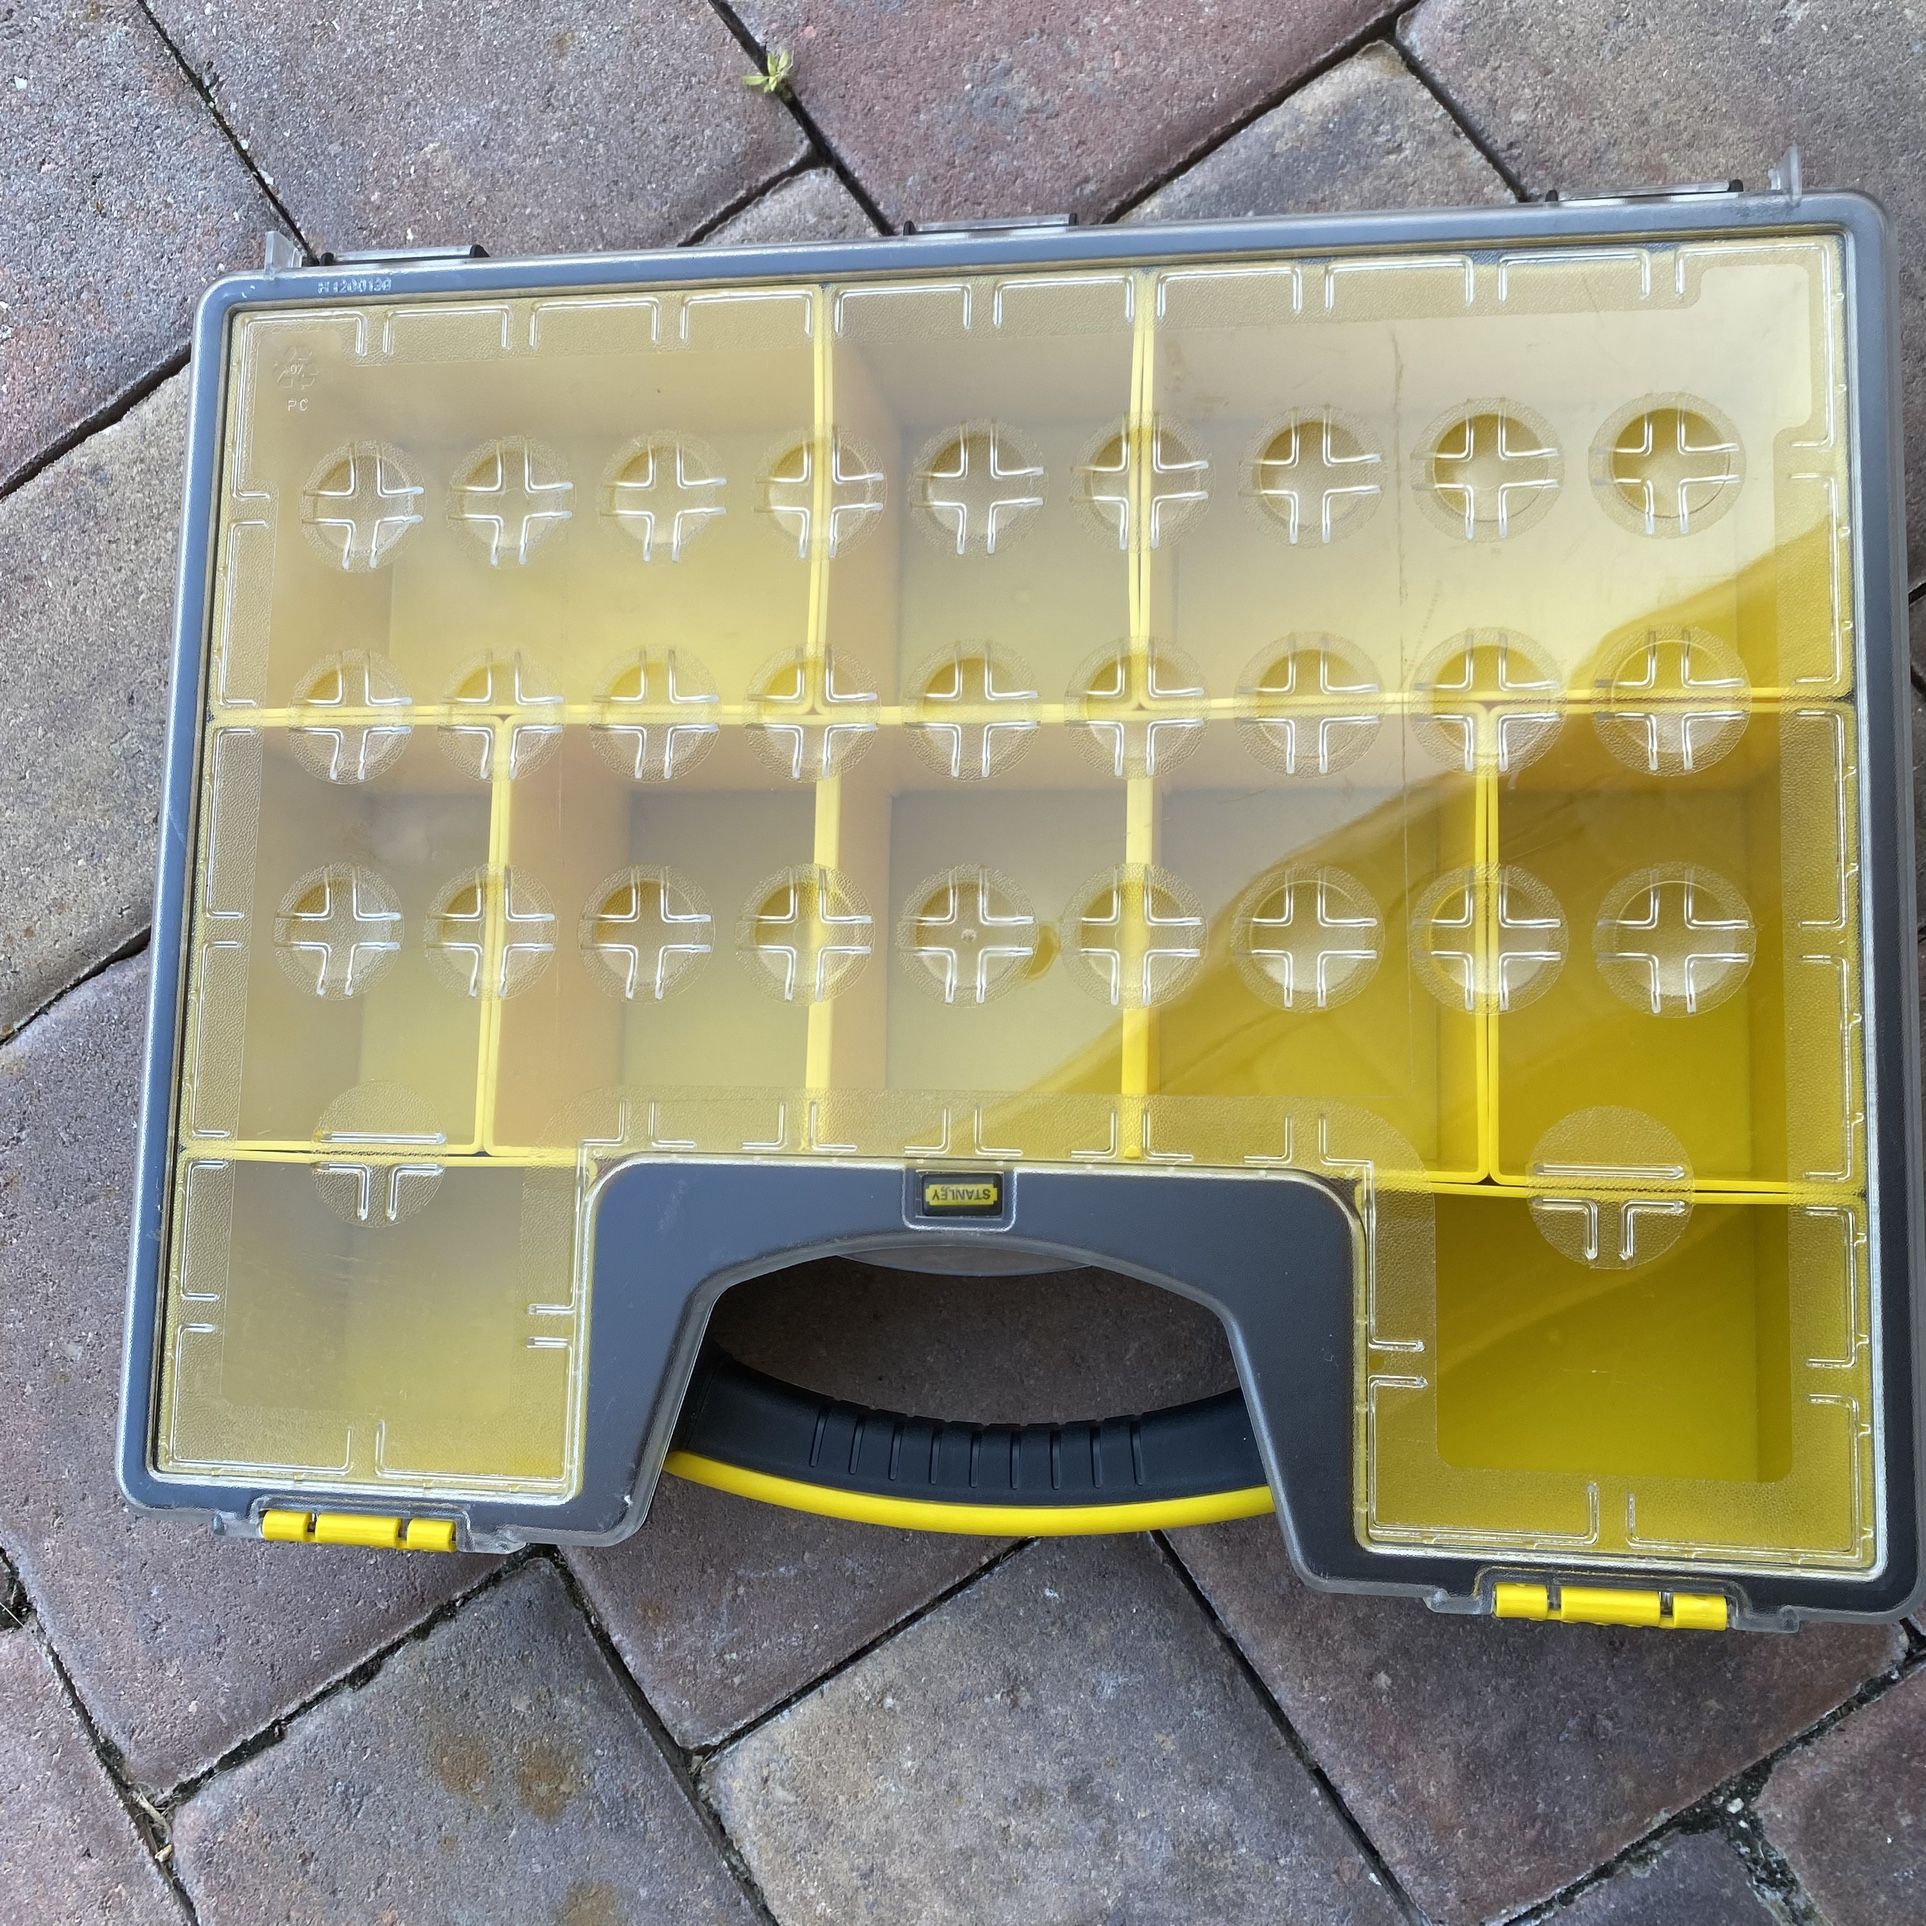 Carrying Case For Nails And Screws